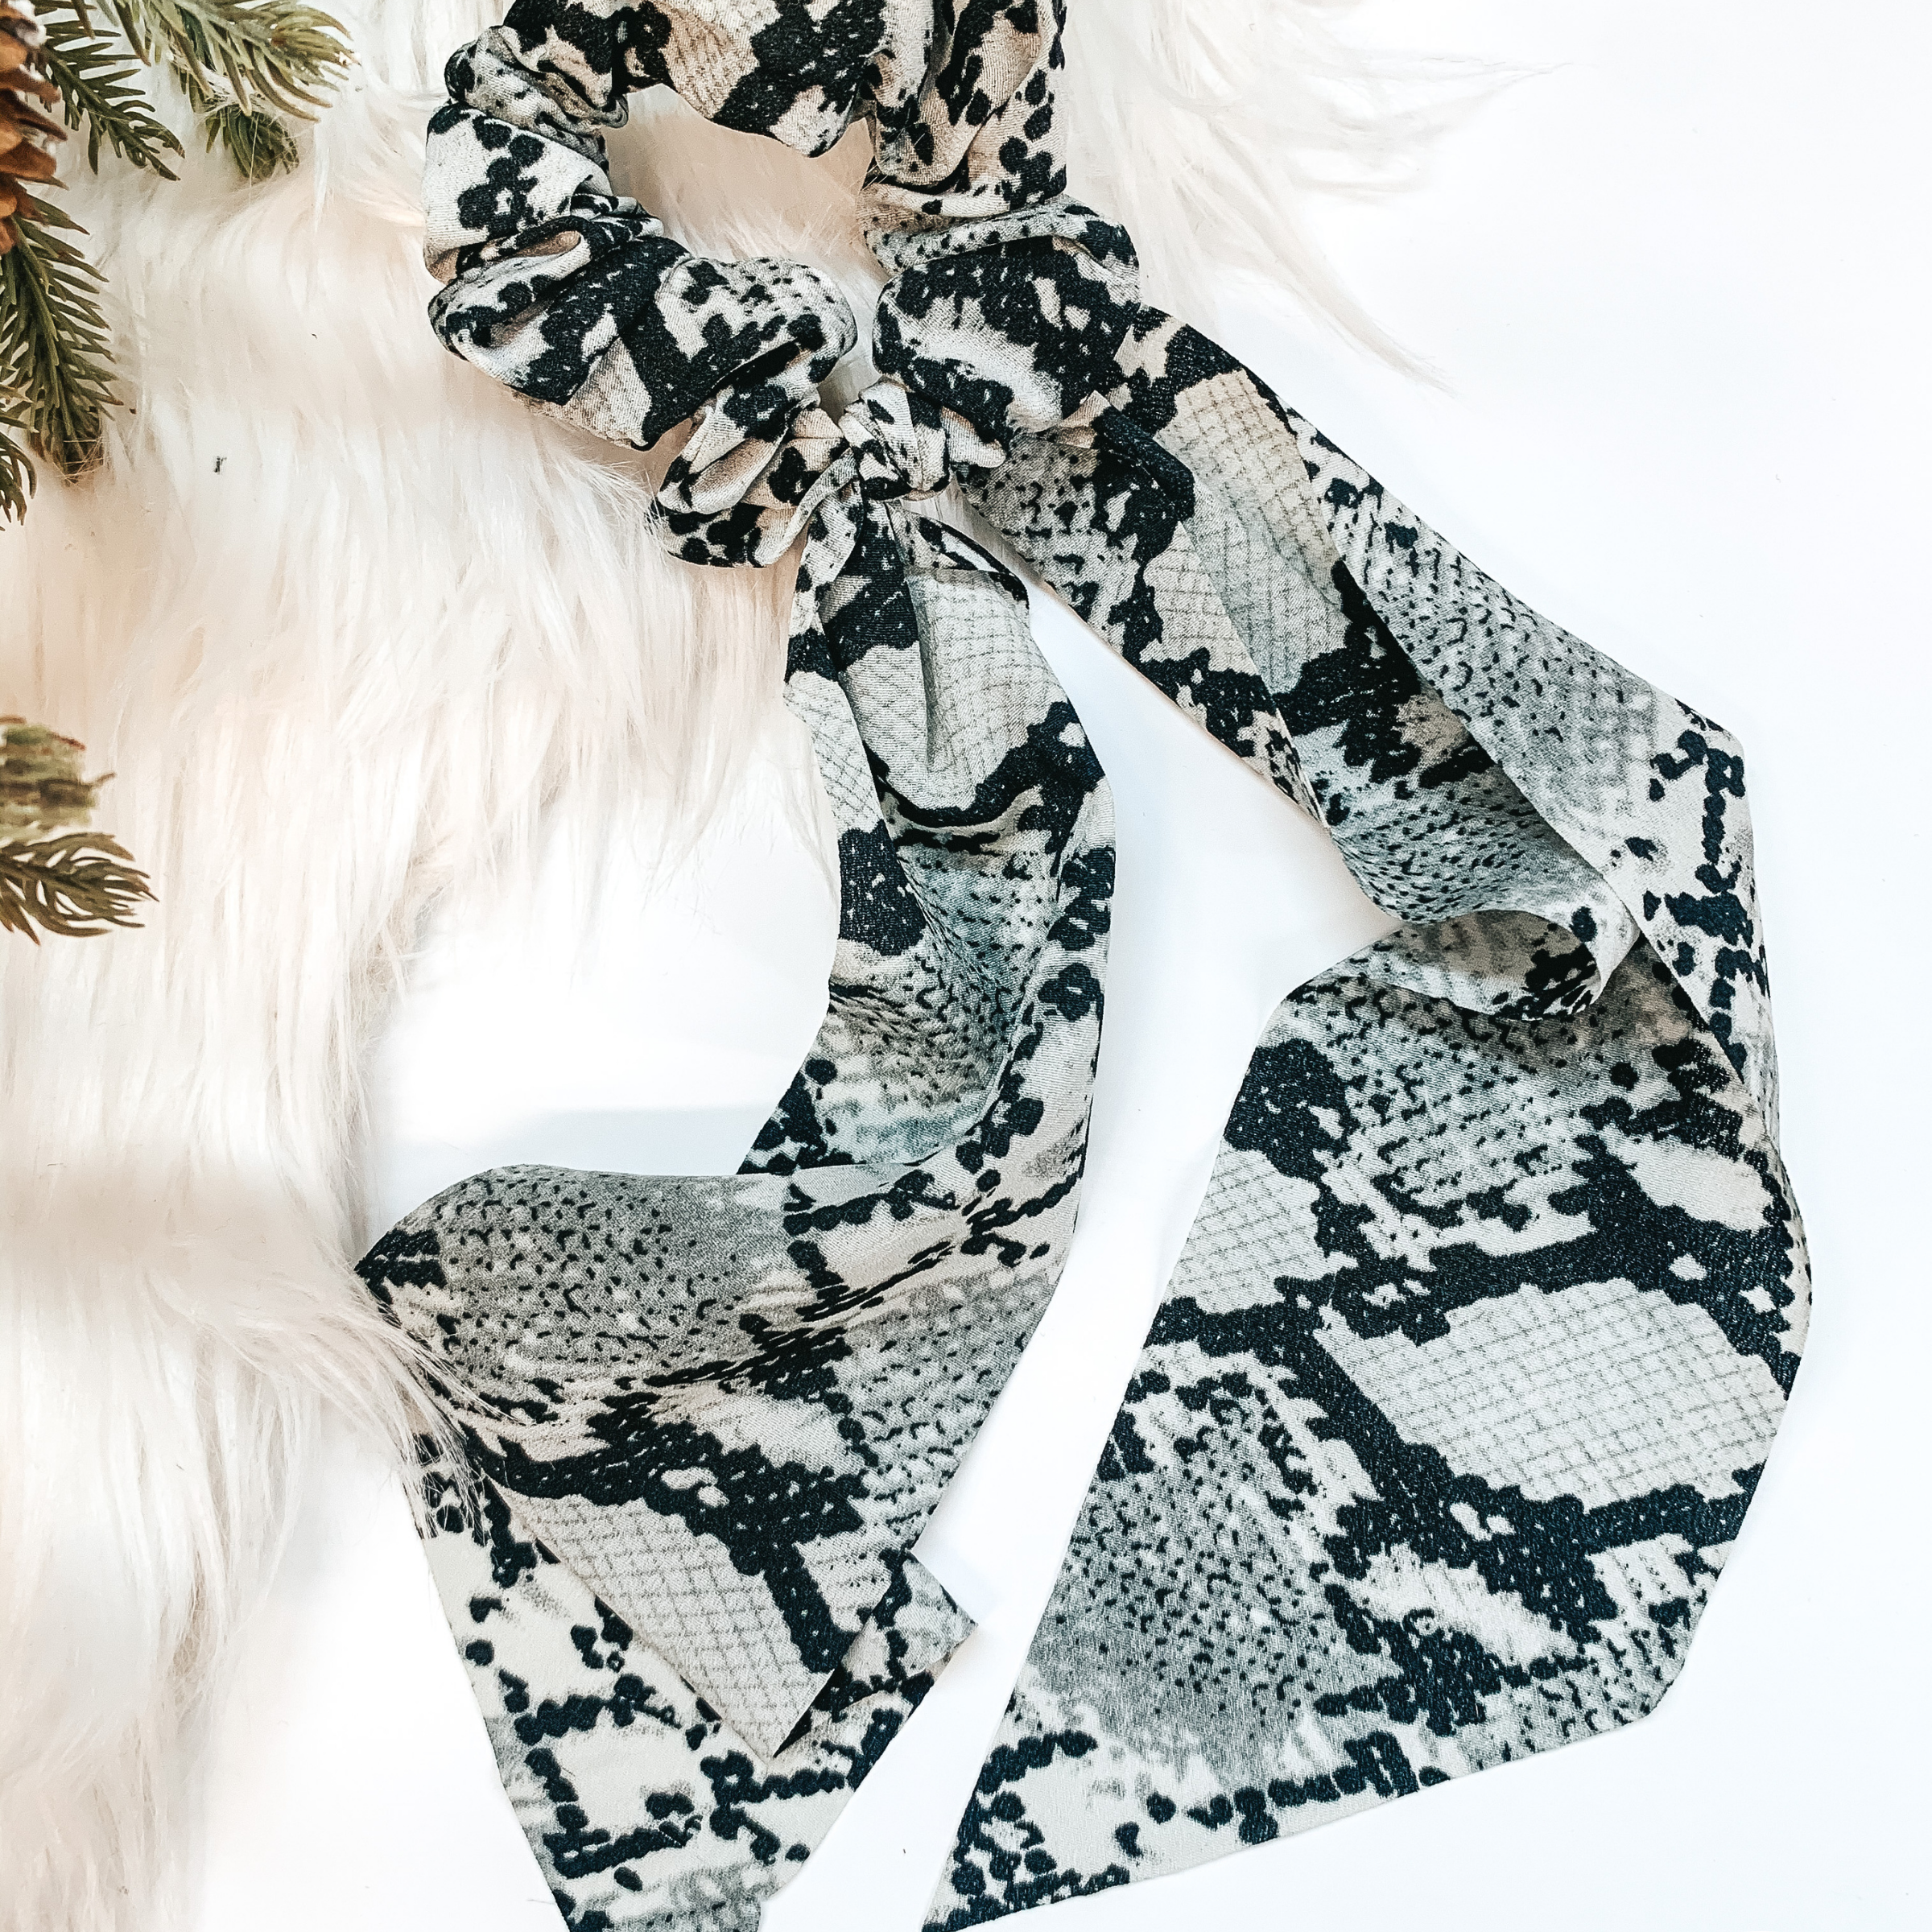 Buy 3 for $10 | Snakeskin Scrunchie with Tie - Giddy Up Glamour Boutique